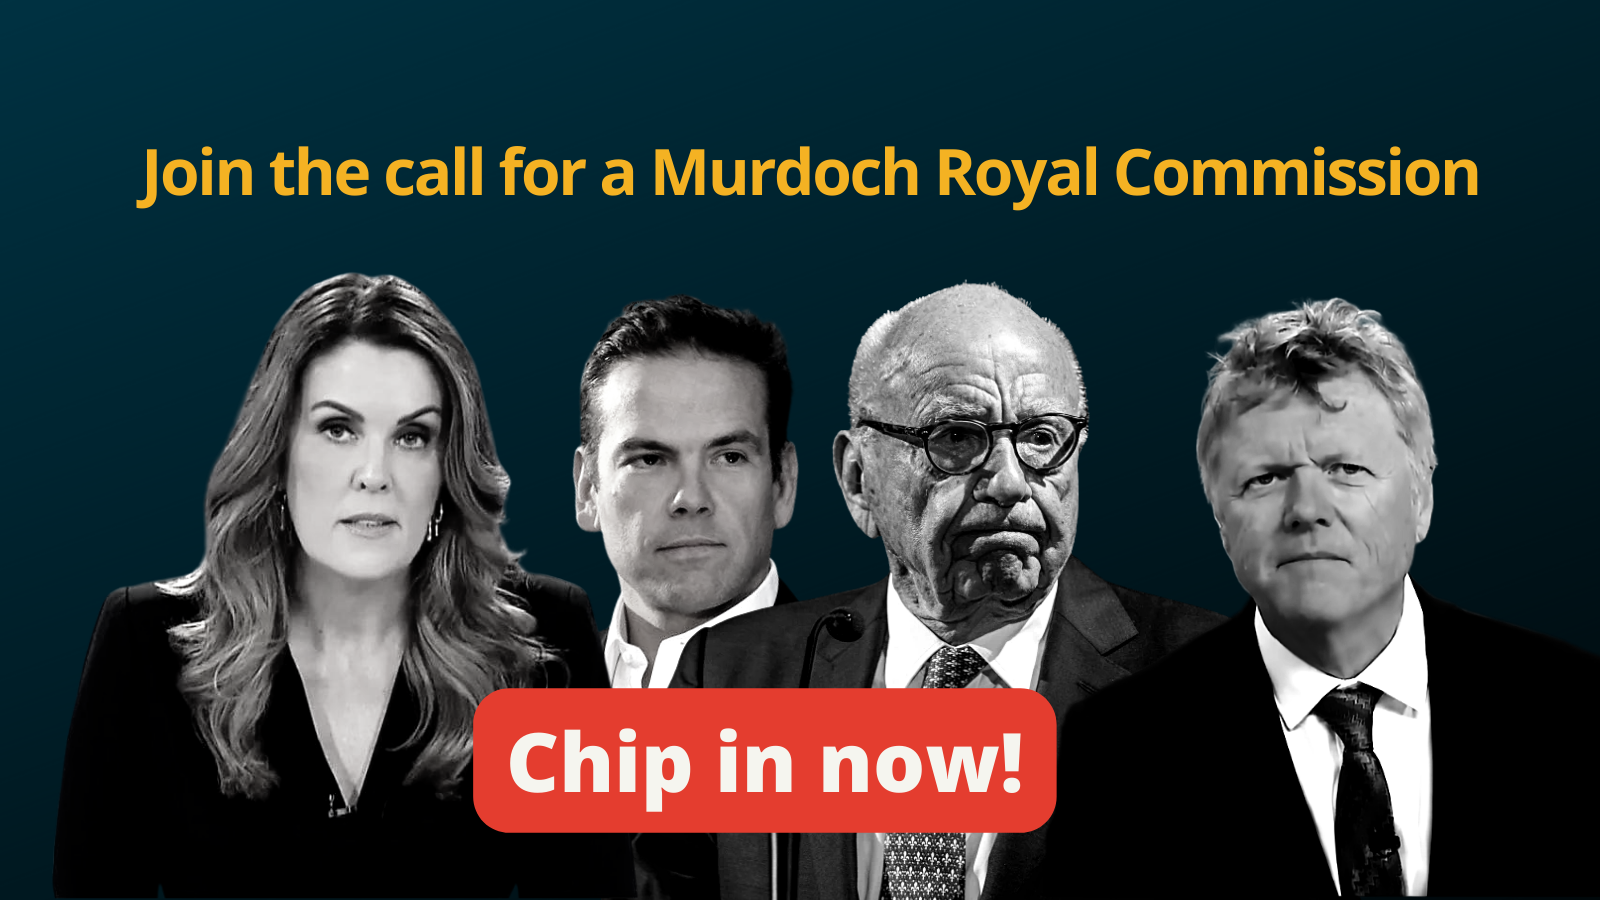 Join the call for a Murdoch Royal Commission, chip in now! Banner with black and white images of the Murdochs, Andrew Bolt and Peta Credlin